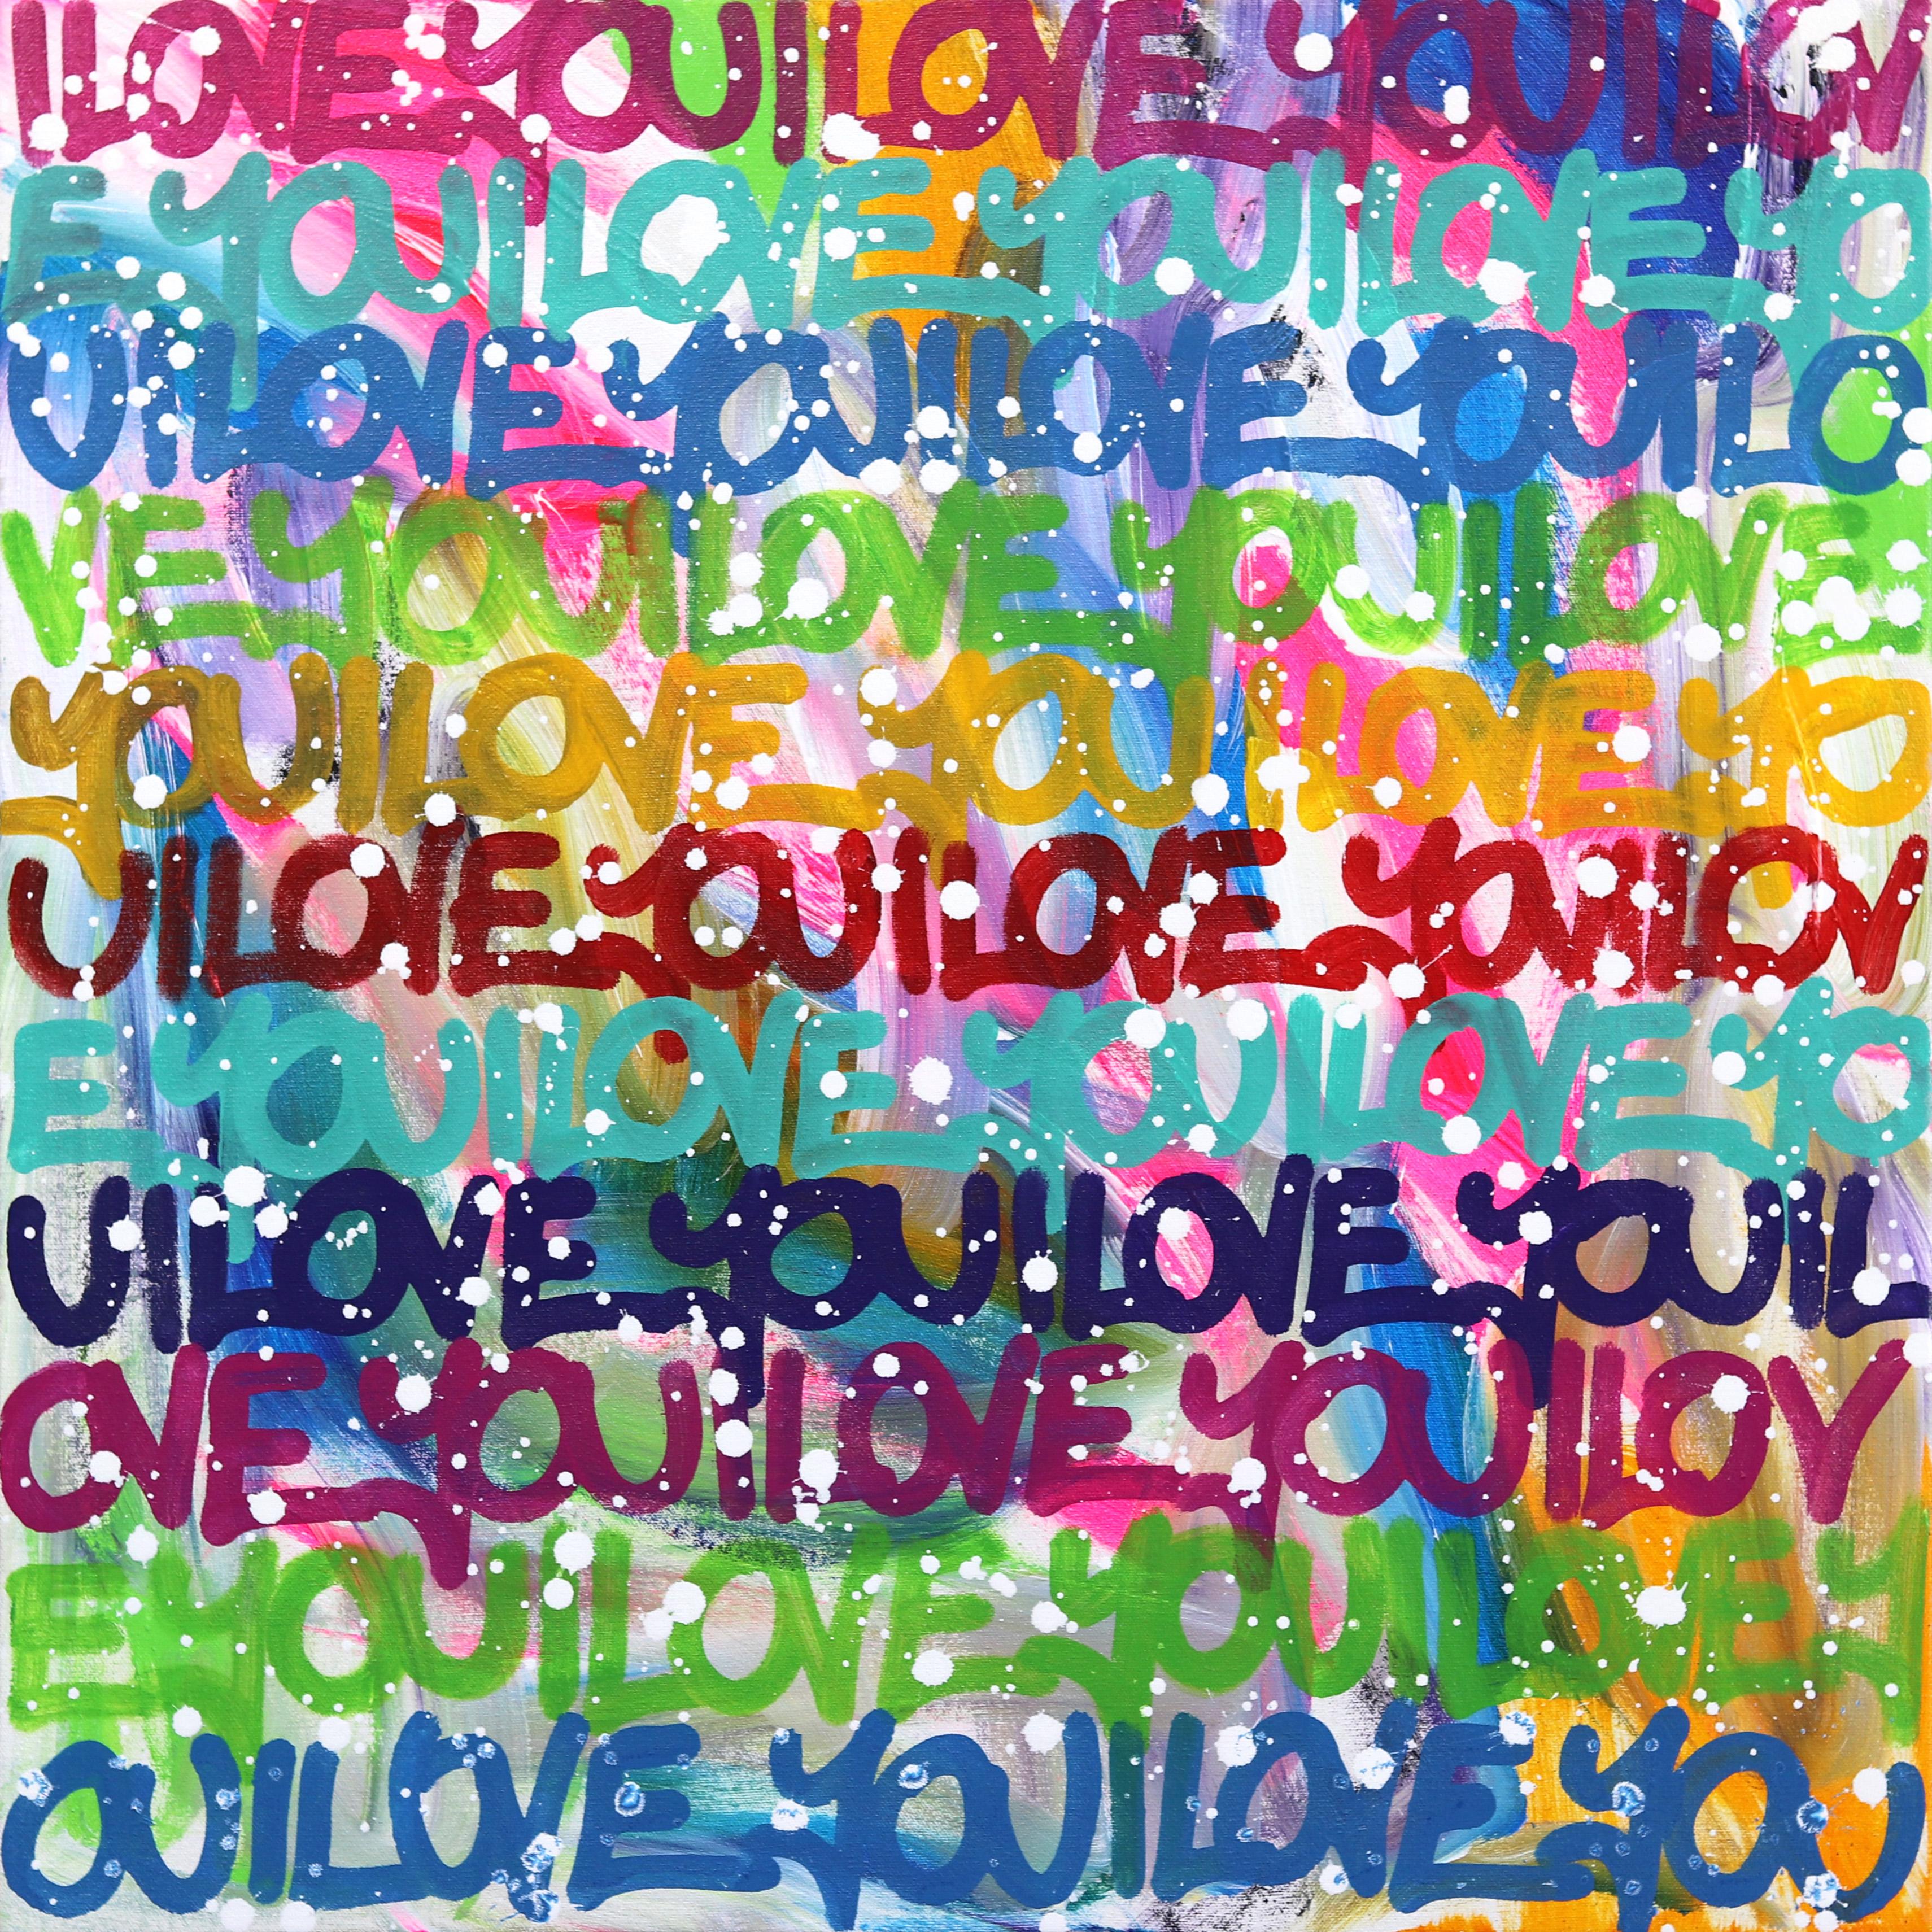 Amber Goldhammer Abstract Painting – Show Your Colorful Side - Buntes Original Love Graffiti-Gemälde auf Leinwand